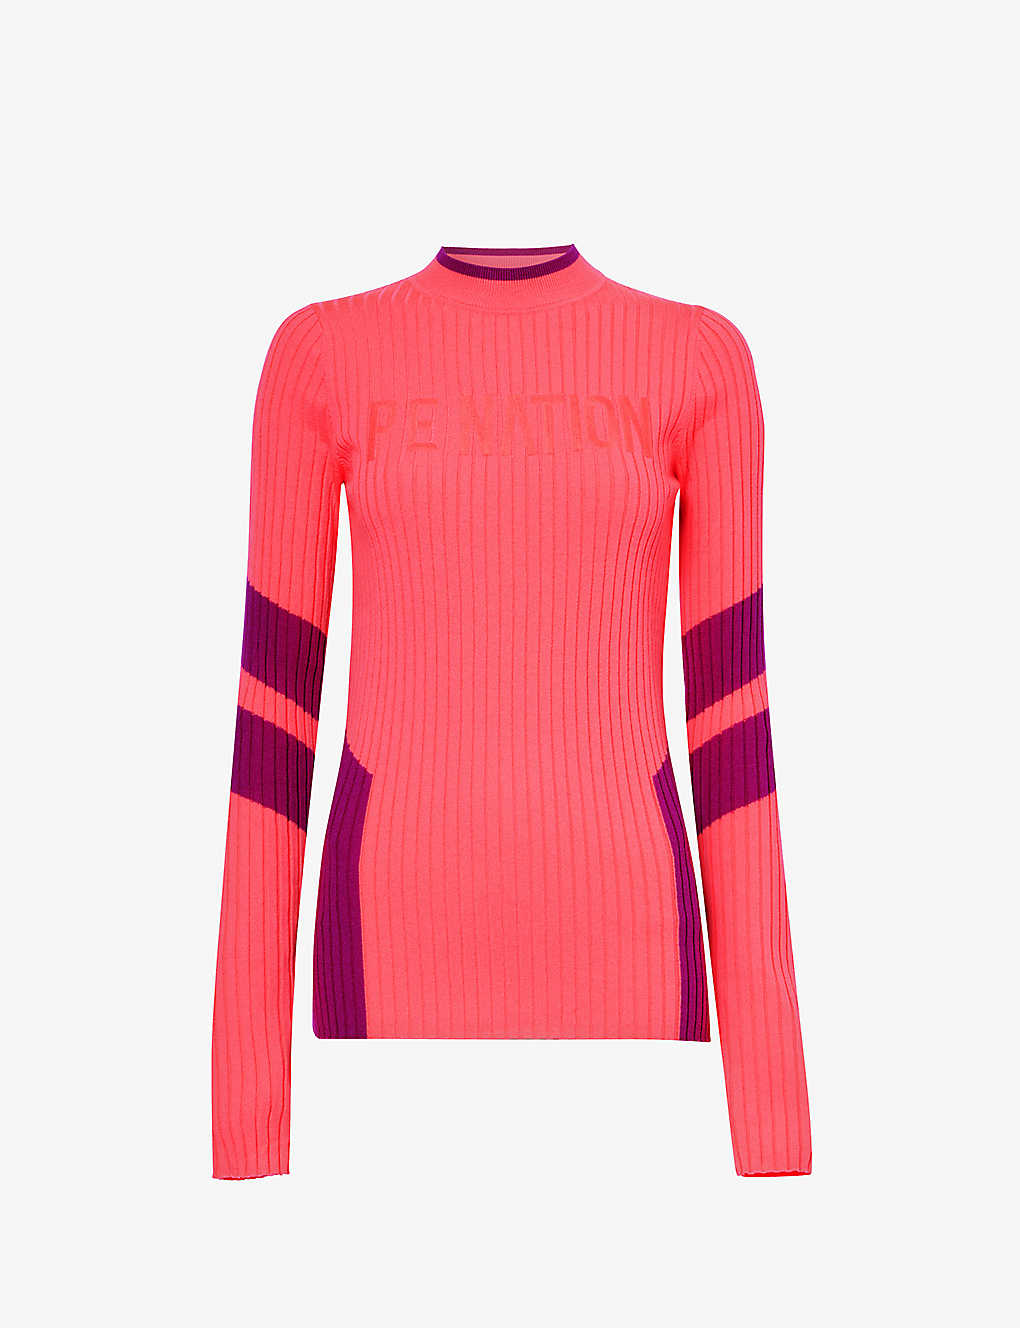 P.e Nation Womens Bright Pink Chamonix Ribbed Wool-blend Knitted Top